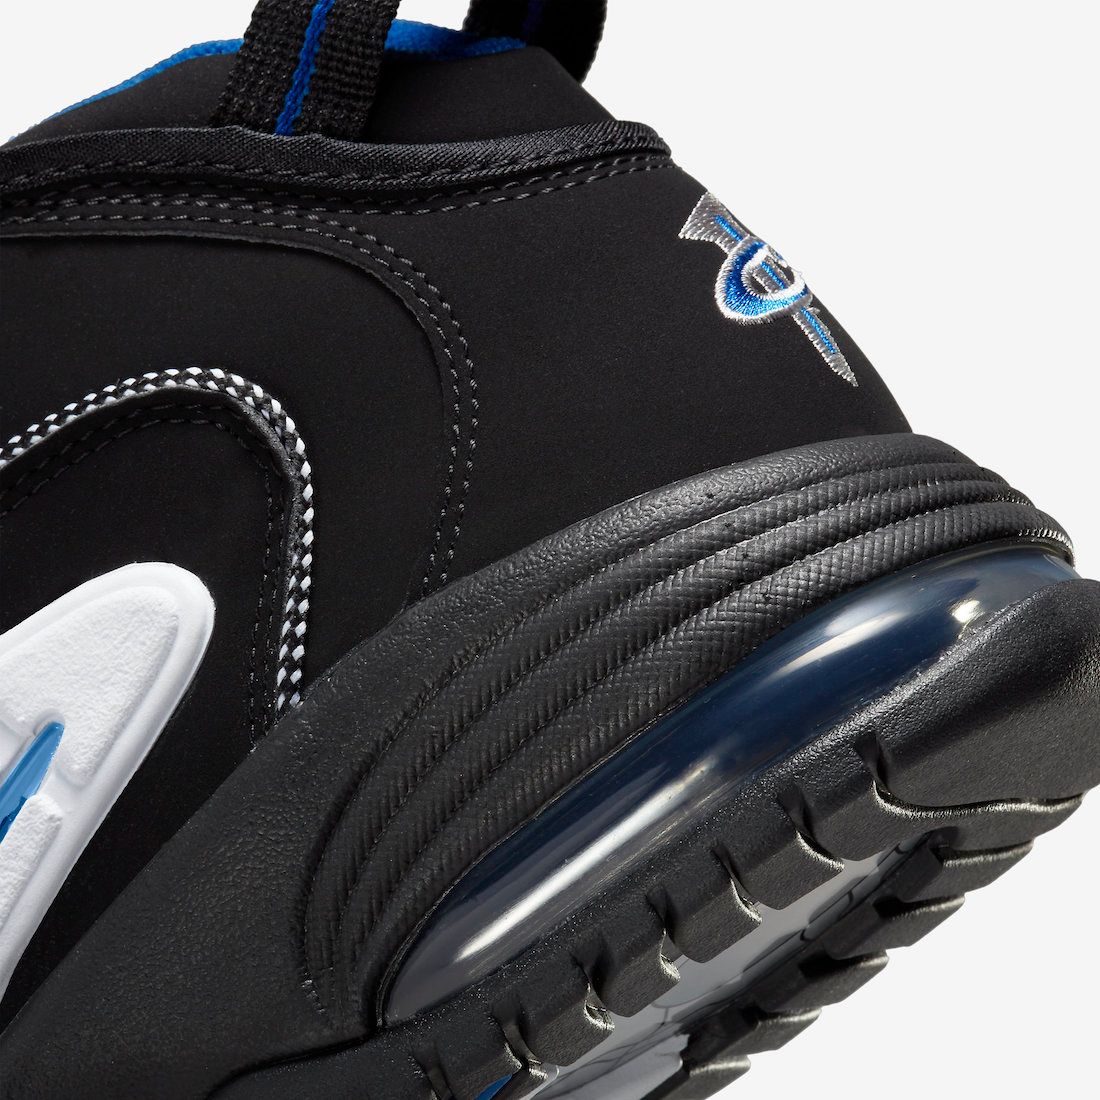 nike-air-max-penny-1-orlando-DN2487-001-release-date